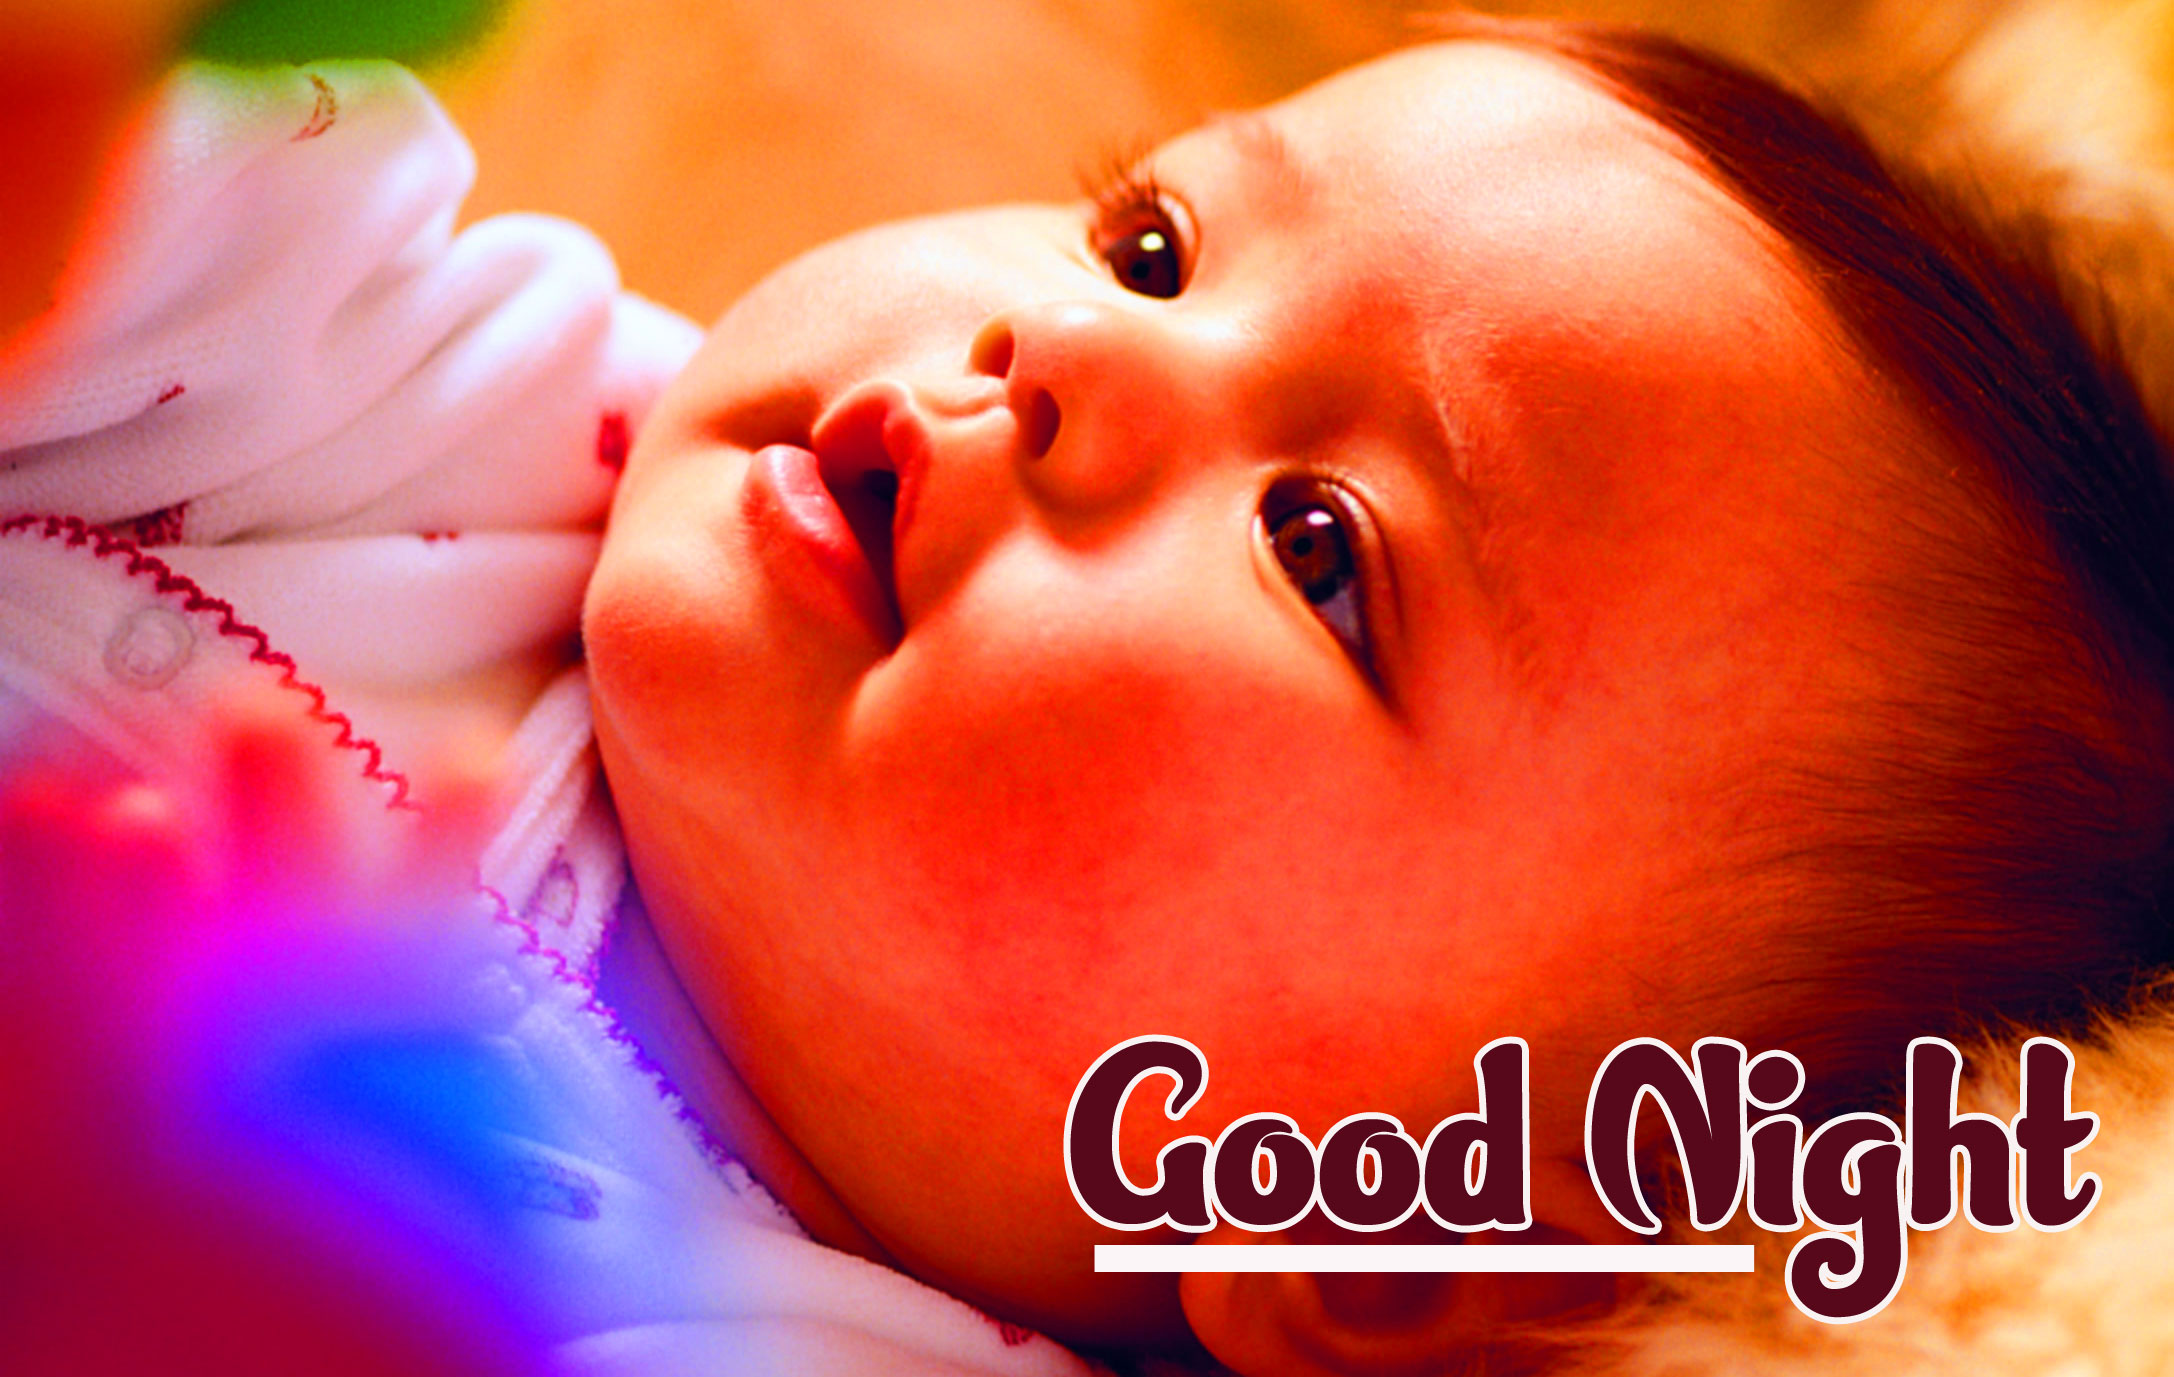 Cute Good Night Images Pics Wallpaper for Whatsapp